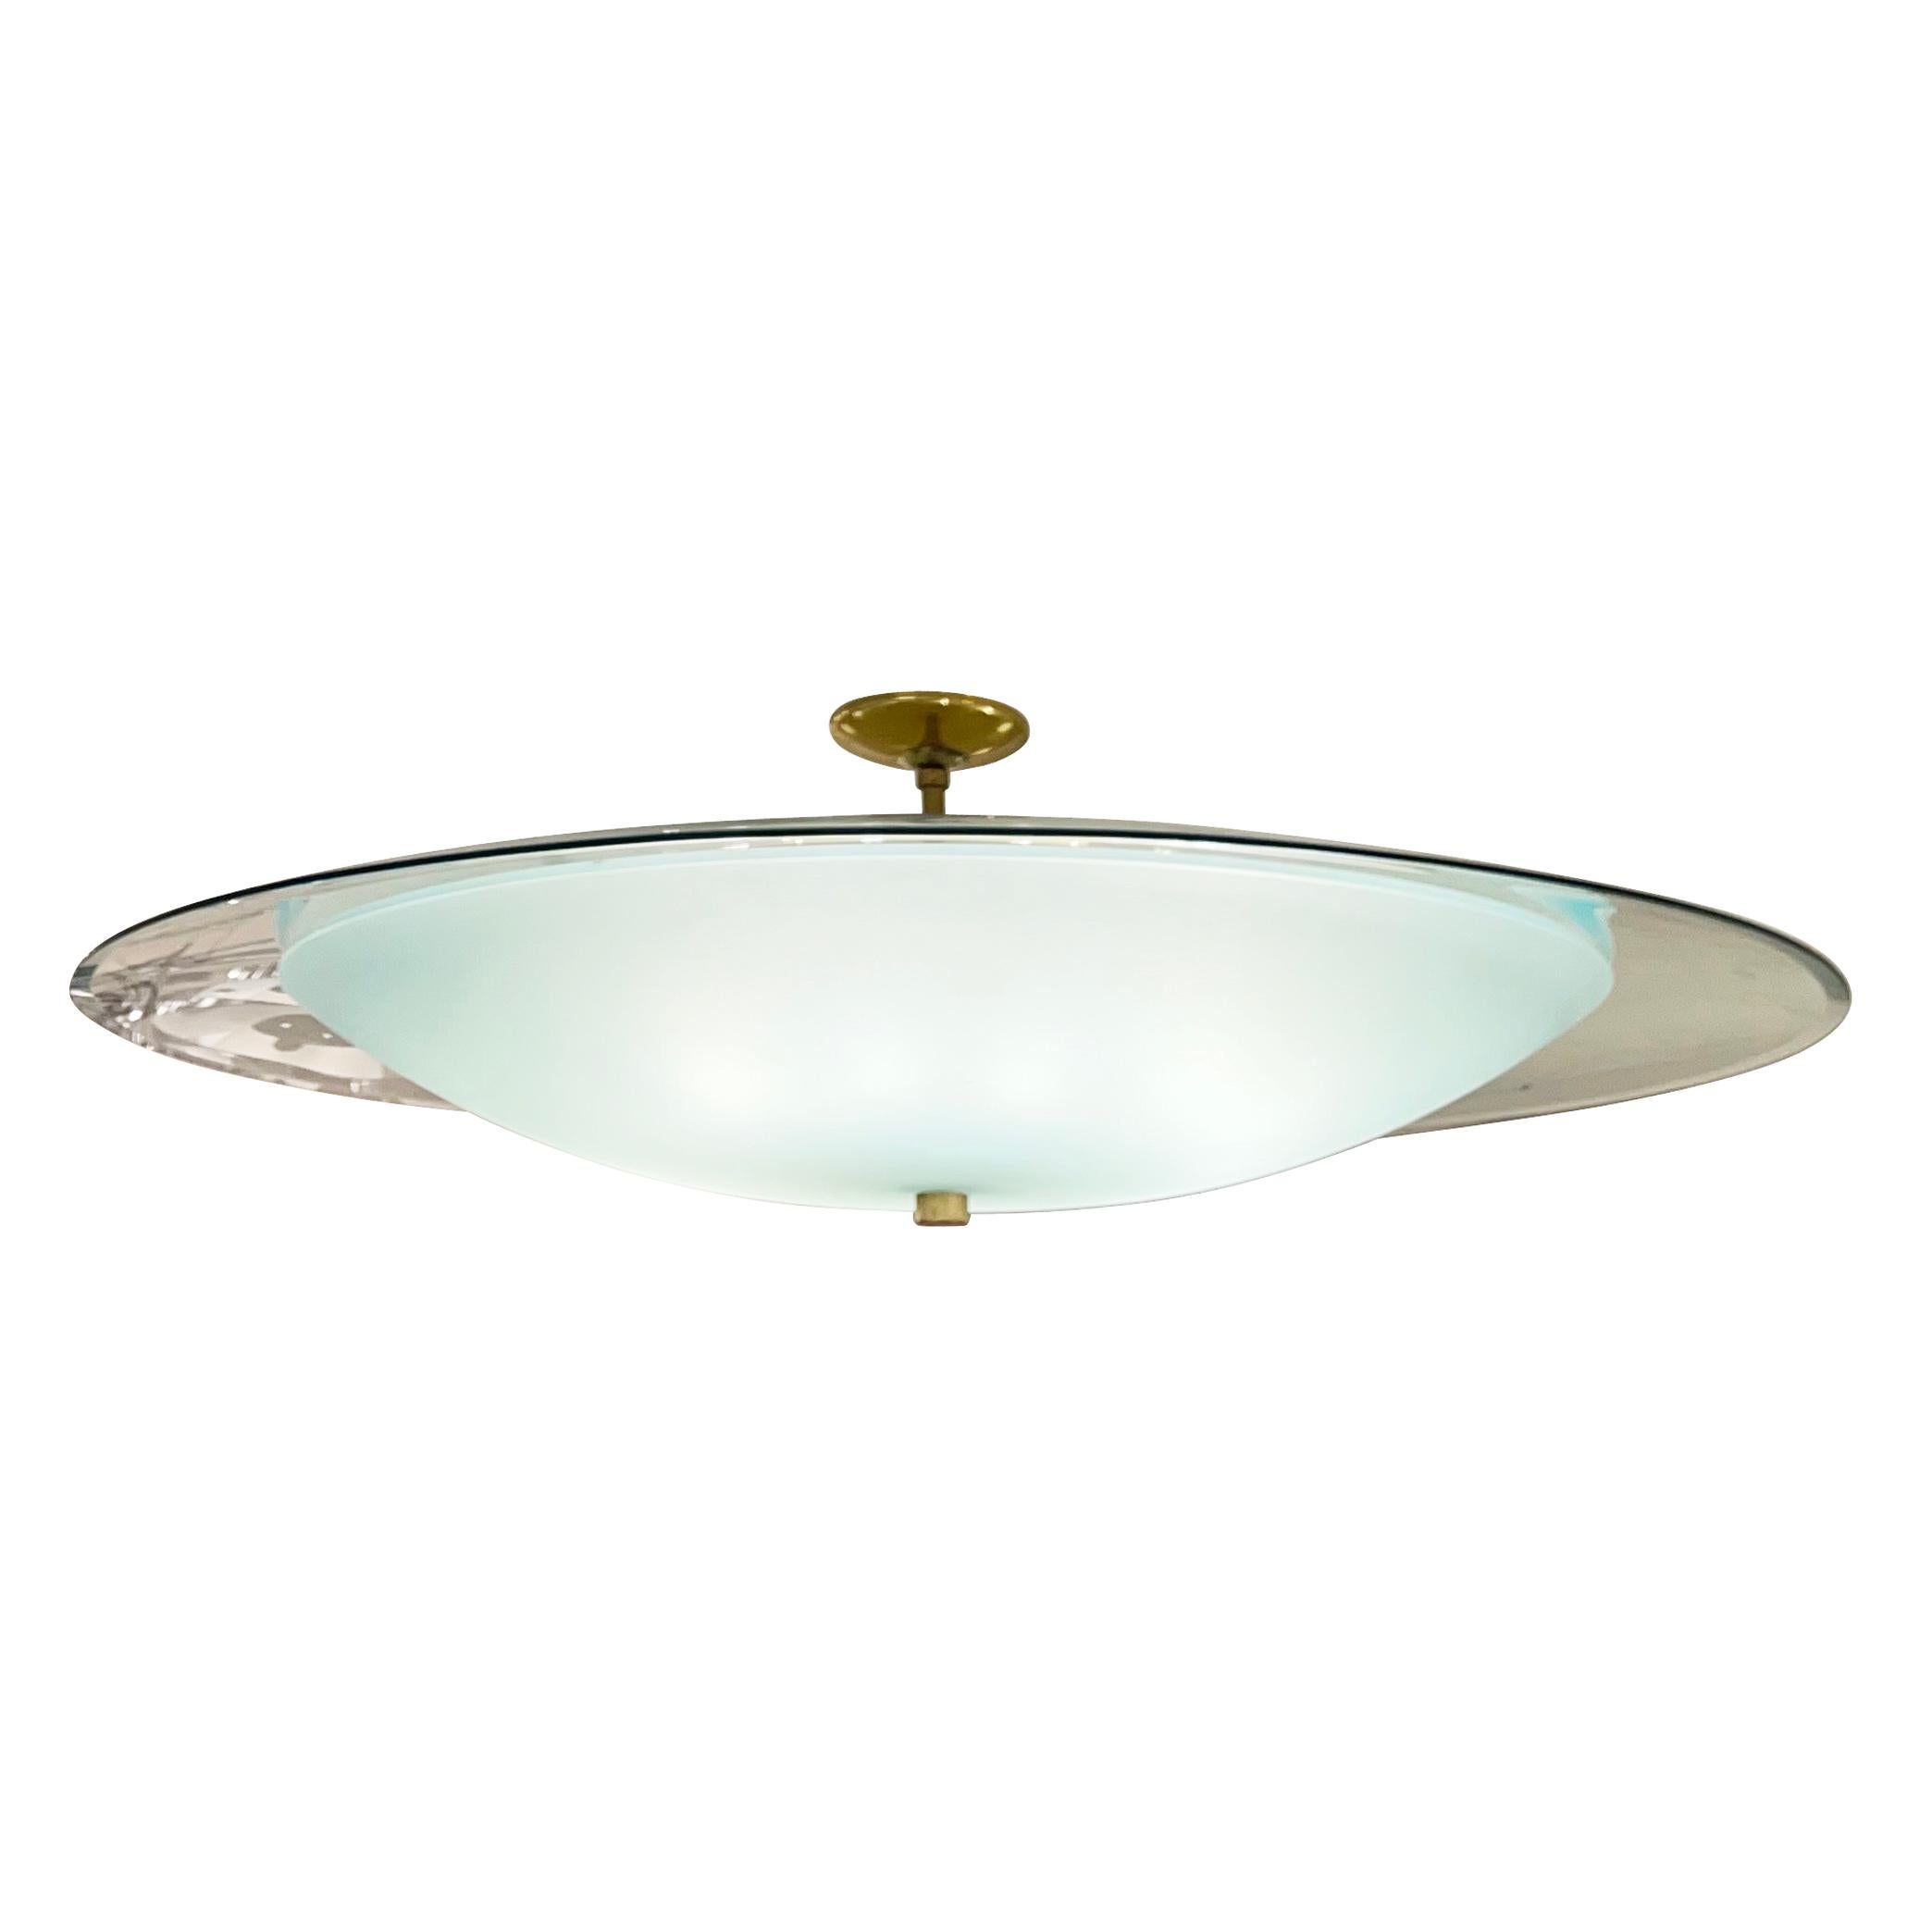 Large Italian mid-century chandelier in the style of Fontana Arte. The lower glass shade is frosted with a light green tint while the larger upper shade is clear. Nice detailing in the bevels of both glasses. Brass hardware and holds twelve